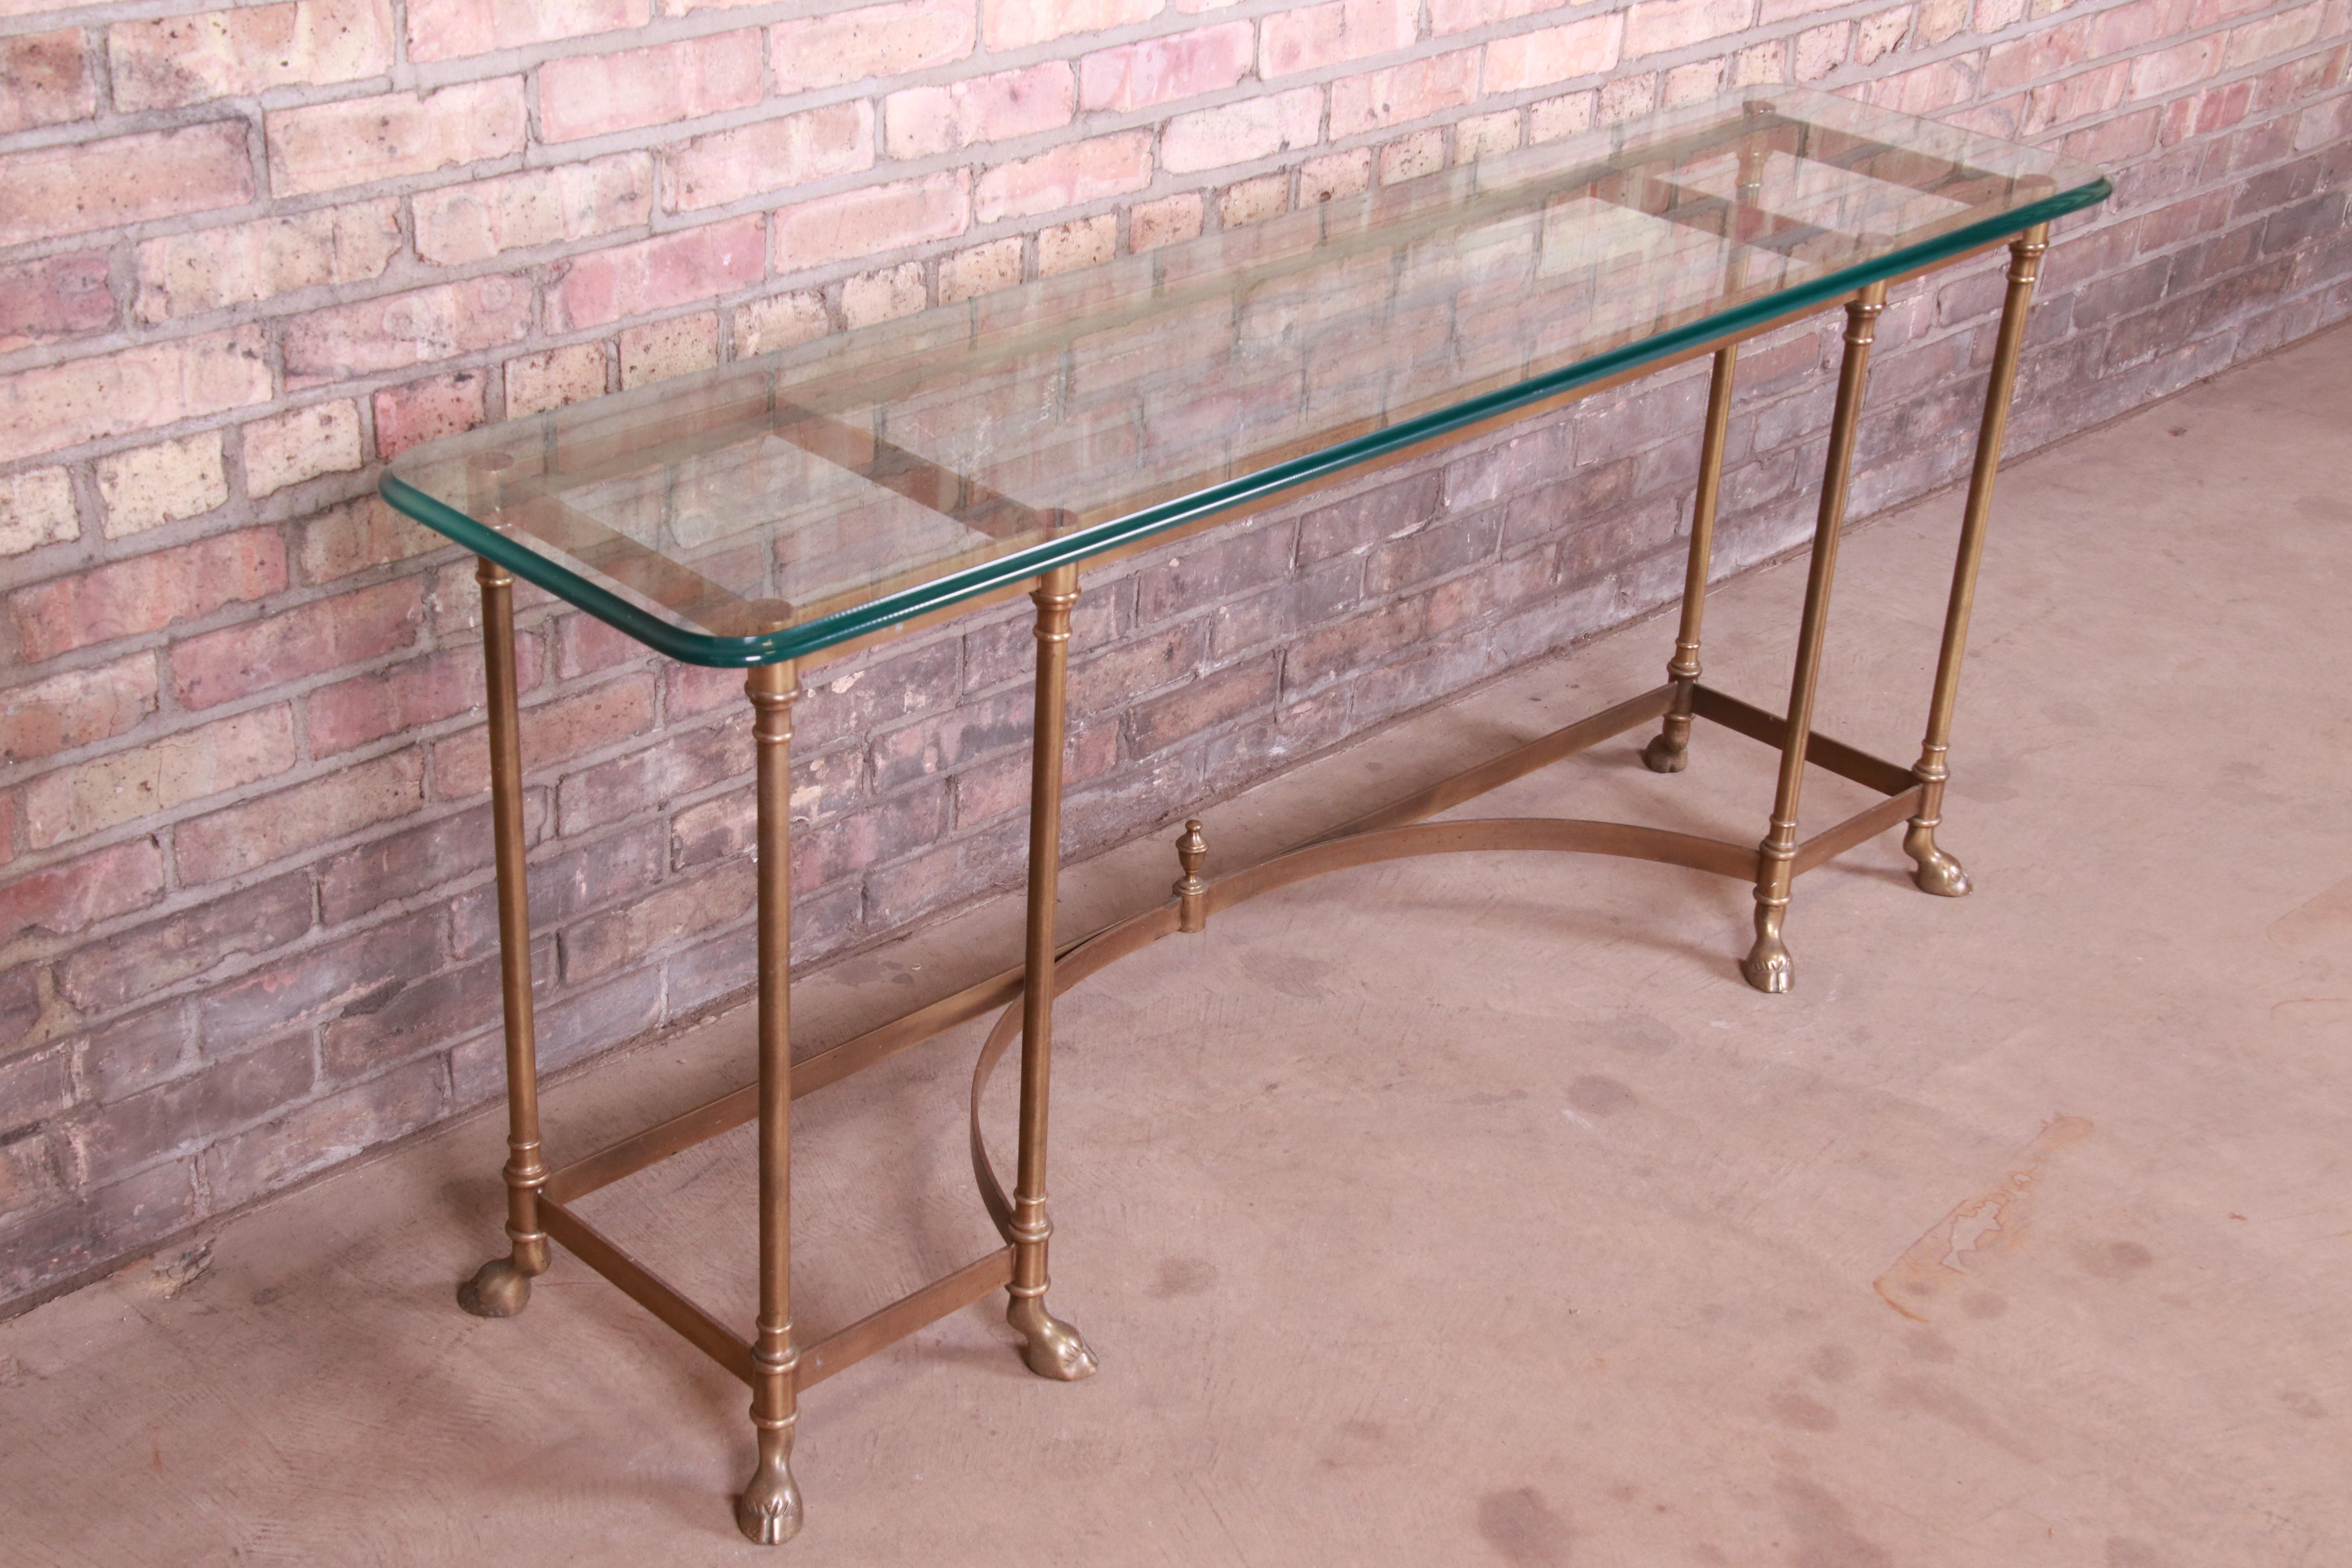 20th Century Labarge Hollywood Regency Brass and Glass Hooved Feet Console Table, circa 1960s